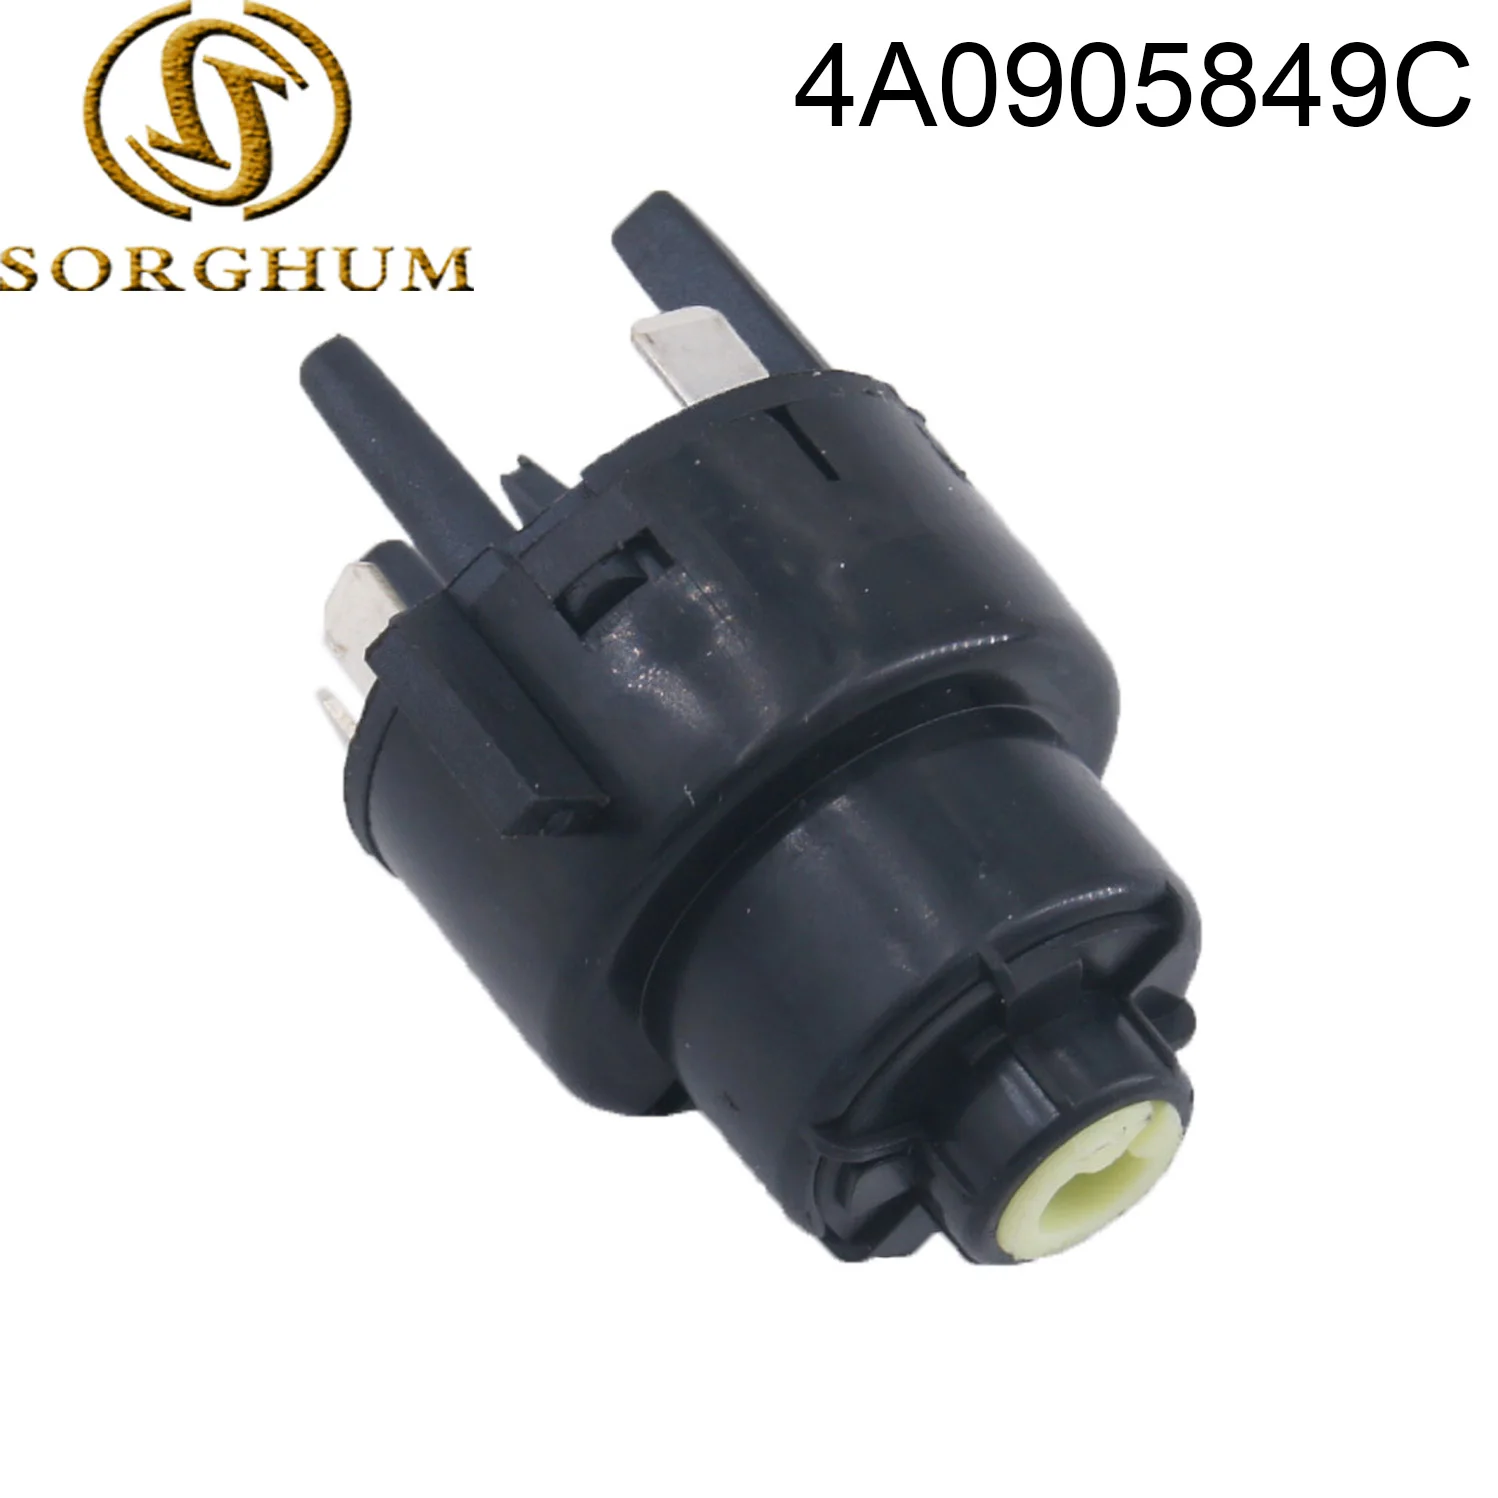 

4A0905849C 4A0905849 Electric Ignition Starter Switch For Audi C3 C4 C5 For VW Passat